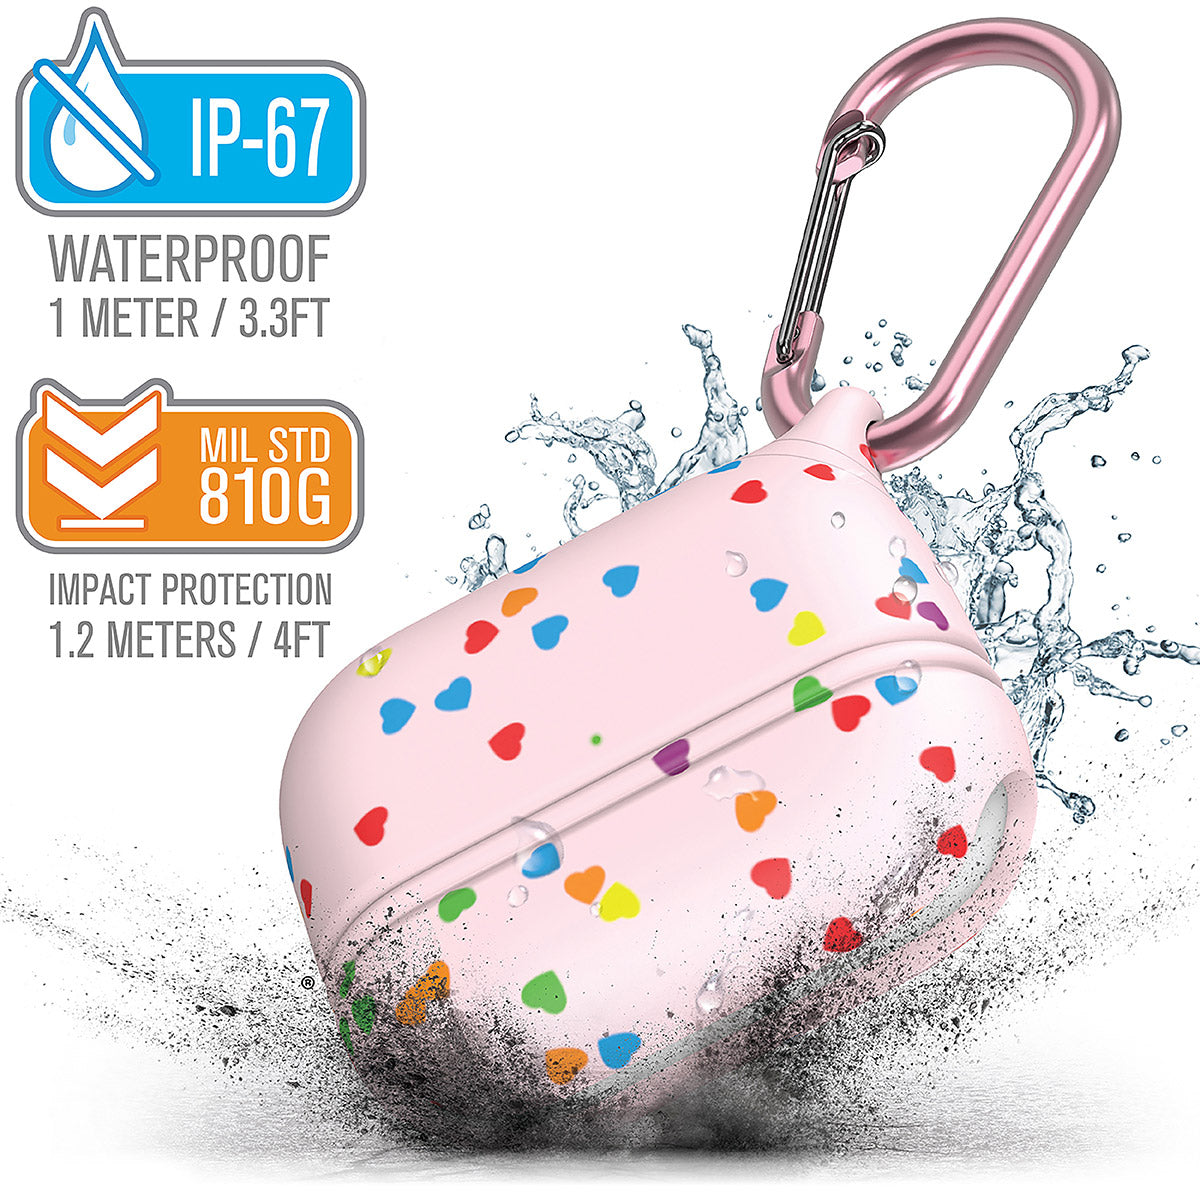 CATAPLAPDPROSWT | catalyst airpods pro gen 2 1 waterproof case carabiner special edition pink with hearts with cracked floor and splashes of water text reads ip-67 waterproof 1 meter 3.3ft mil std 810g impact protection 1.2 meters 4ft